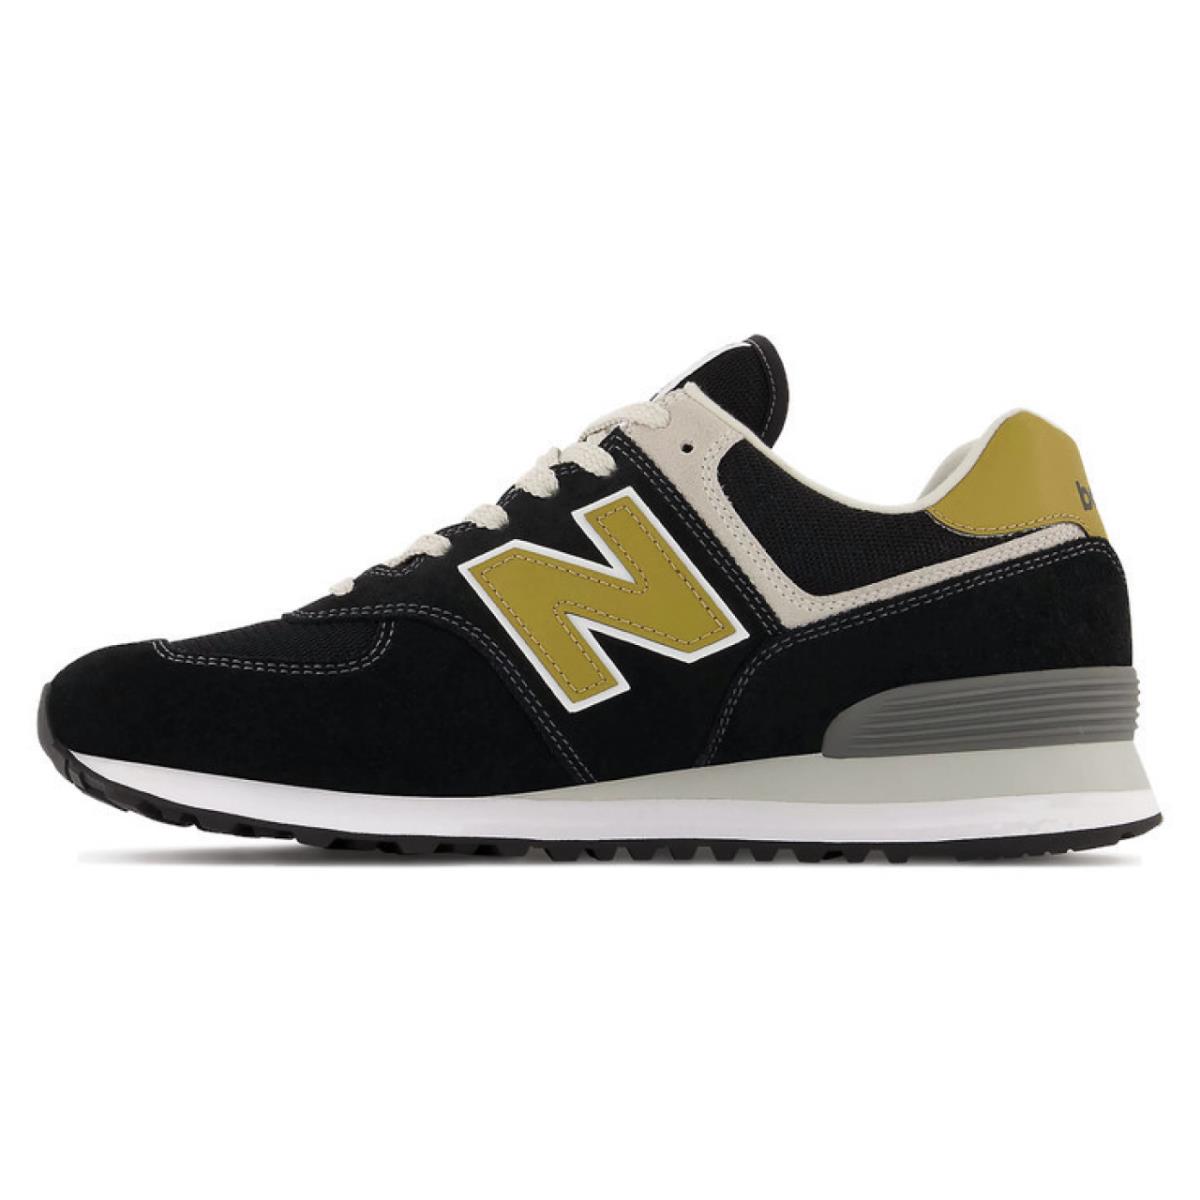 New Balance shoes  - Black , Black with tan Manufacturer 1